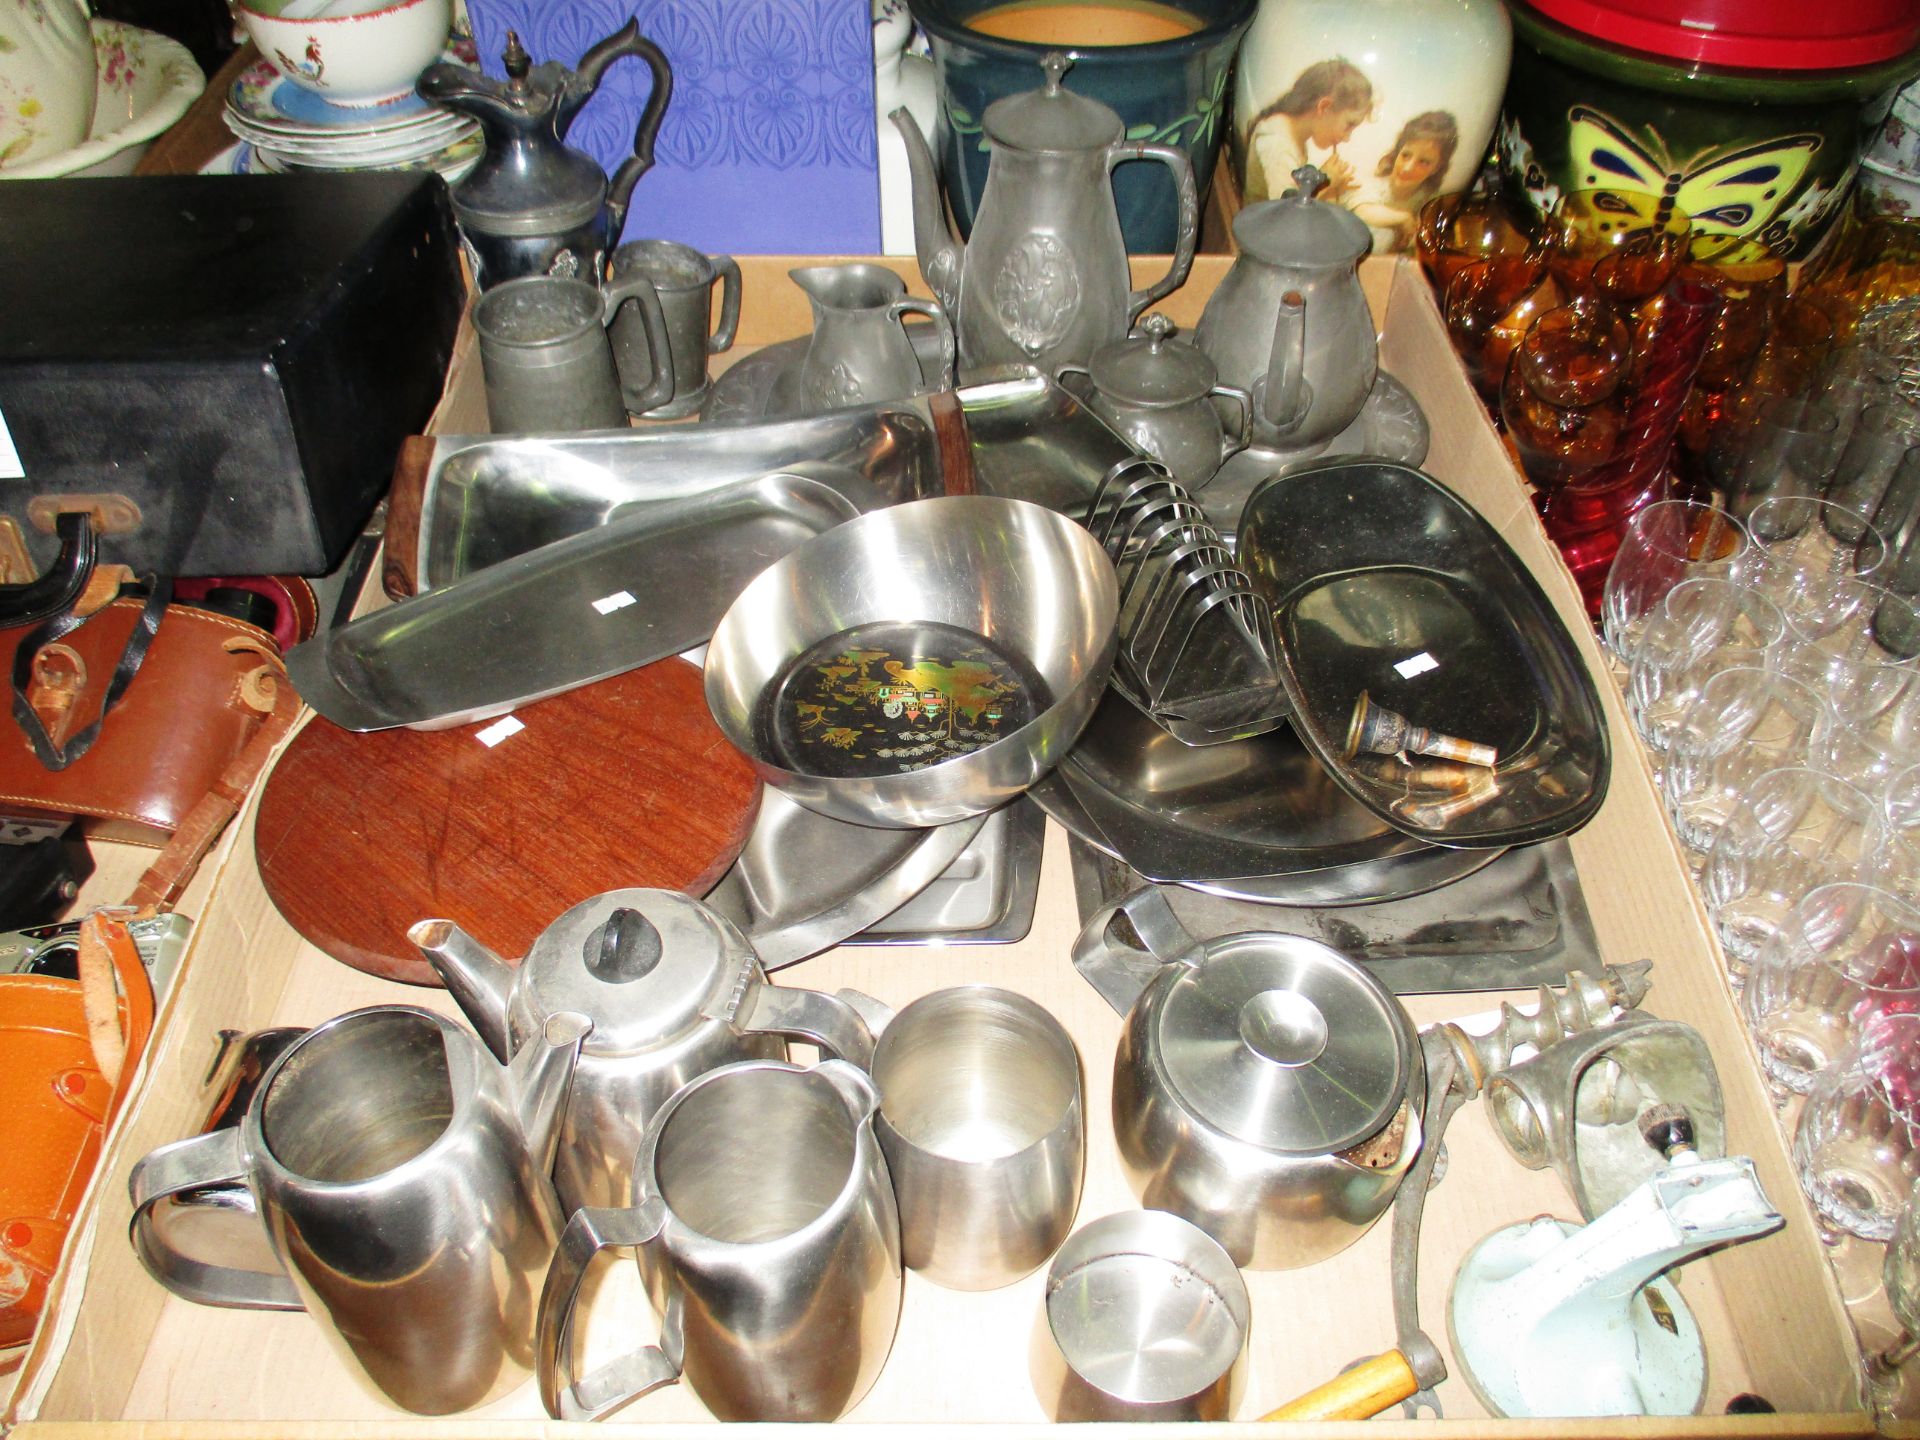 Contents to tray - large quantity of stainless steel kitchen/tableware and a quantity of pewter